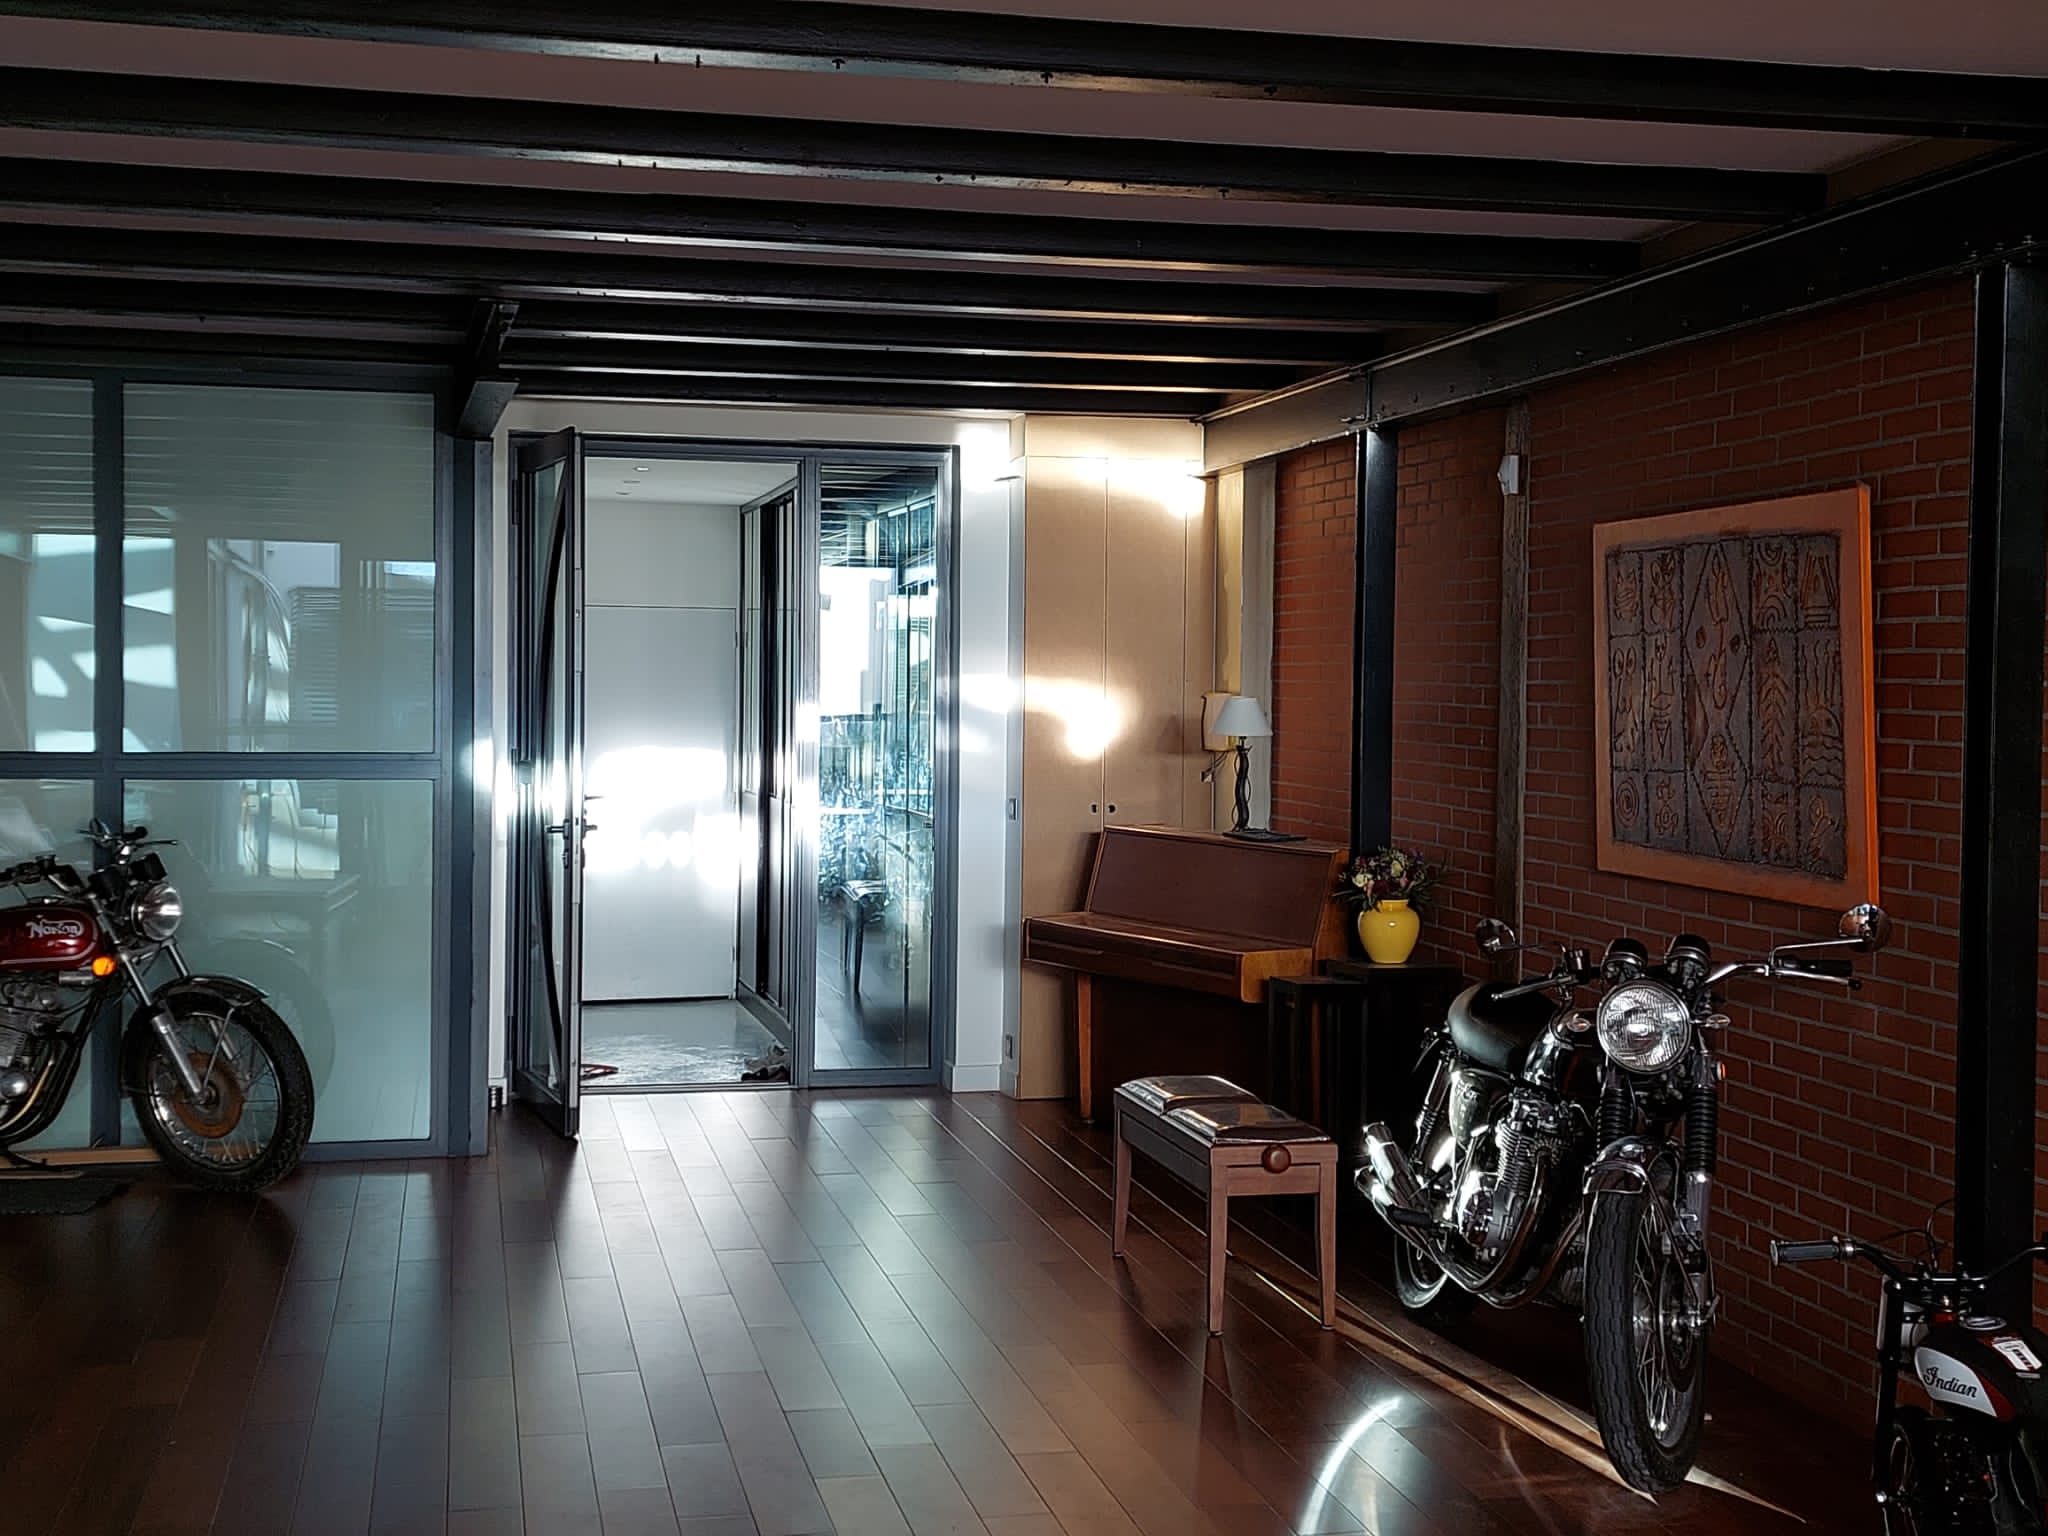 The sun shines through the main room to the entrance of the loft